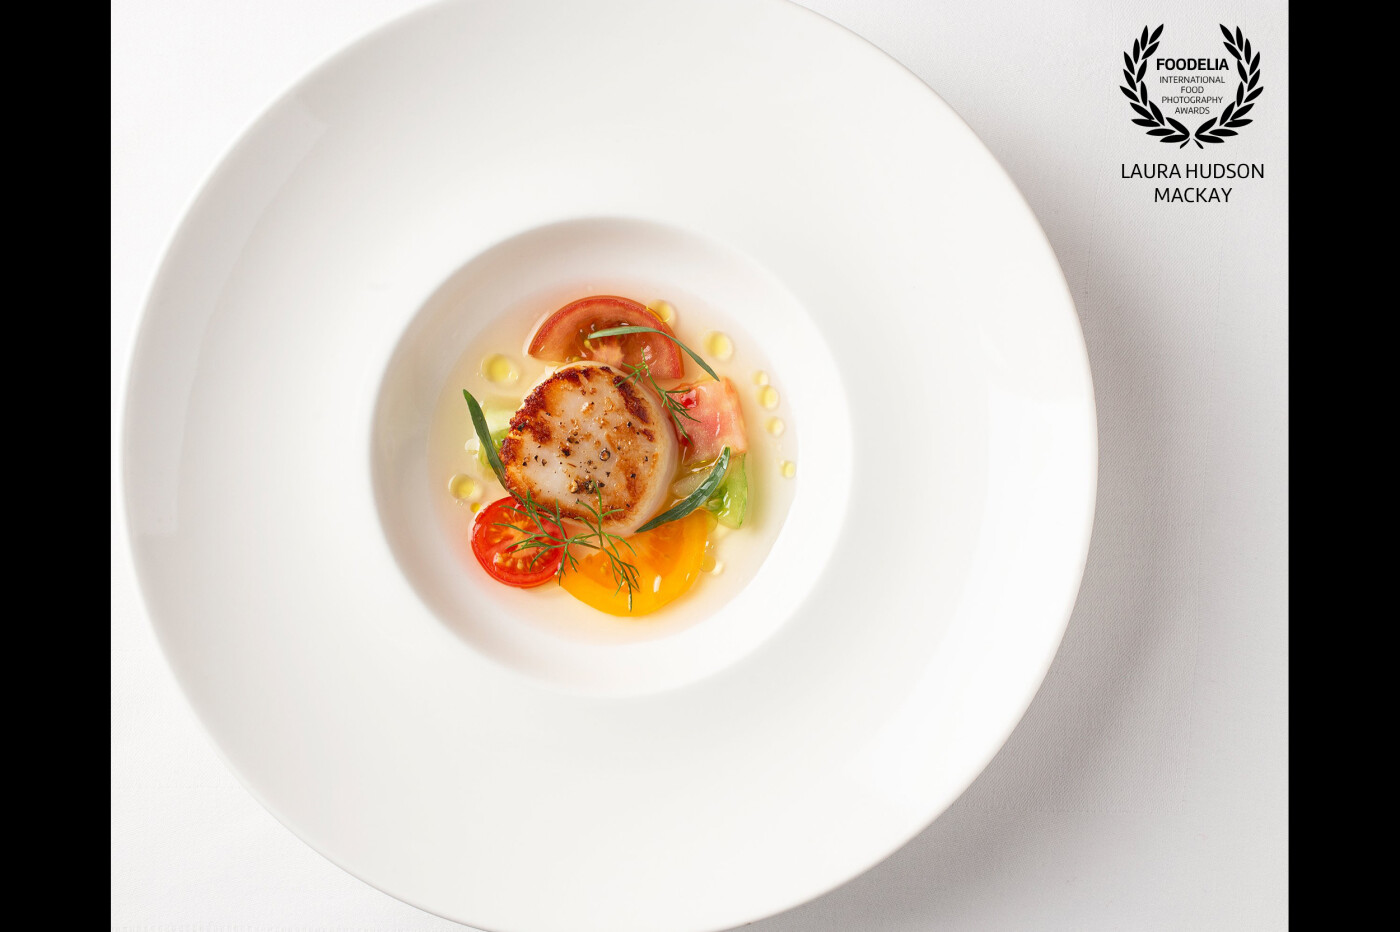 Pan Seared Skye Sea Scallop, with Heirloom Tomato Consommé, Garden Herbs and Olive Oil <br />
<br />
Photoshoot of a delicious dish presented by Chef Tony Pierce at Knockinaam Lodge, Portpatrick, Scotland.